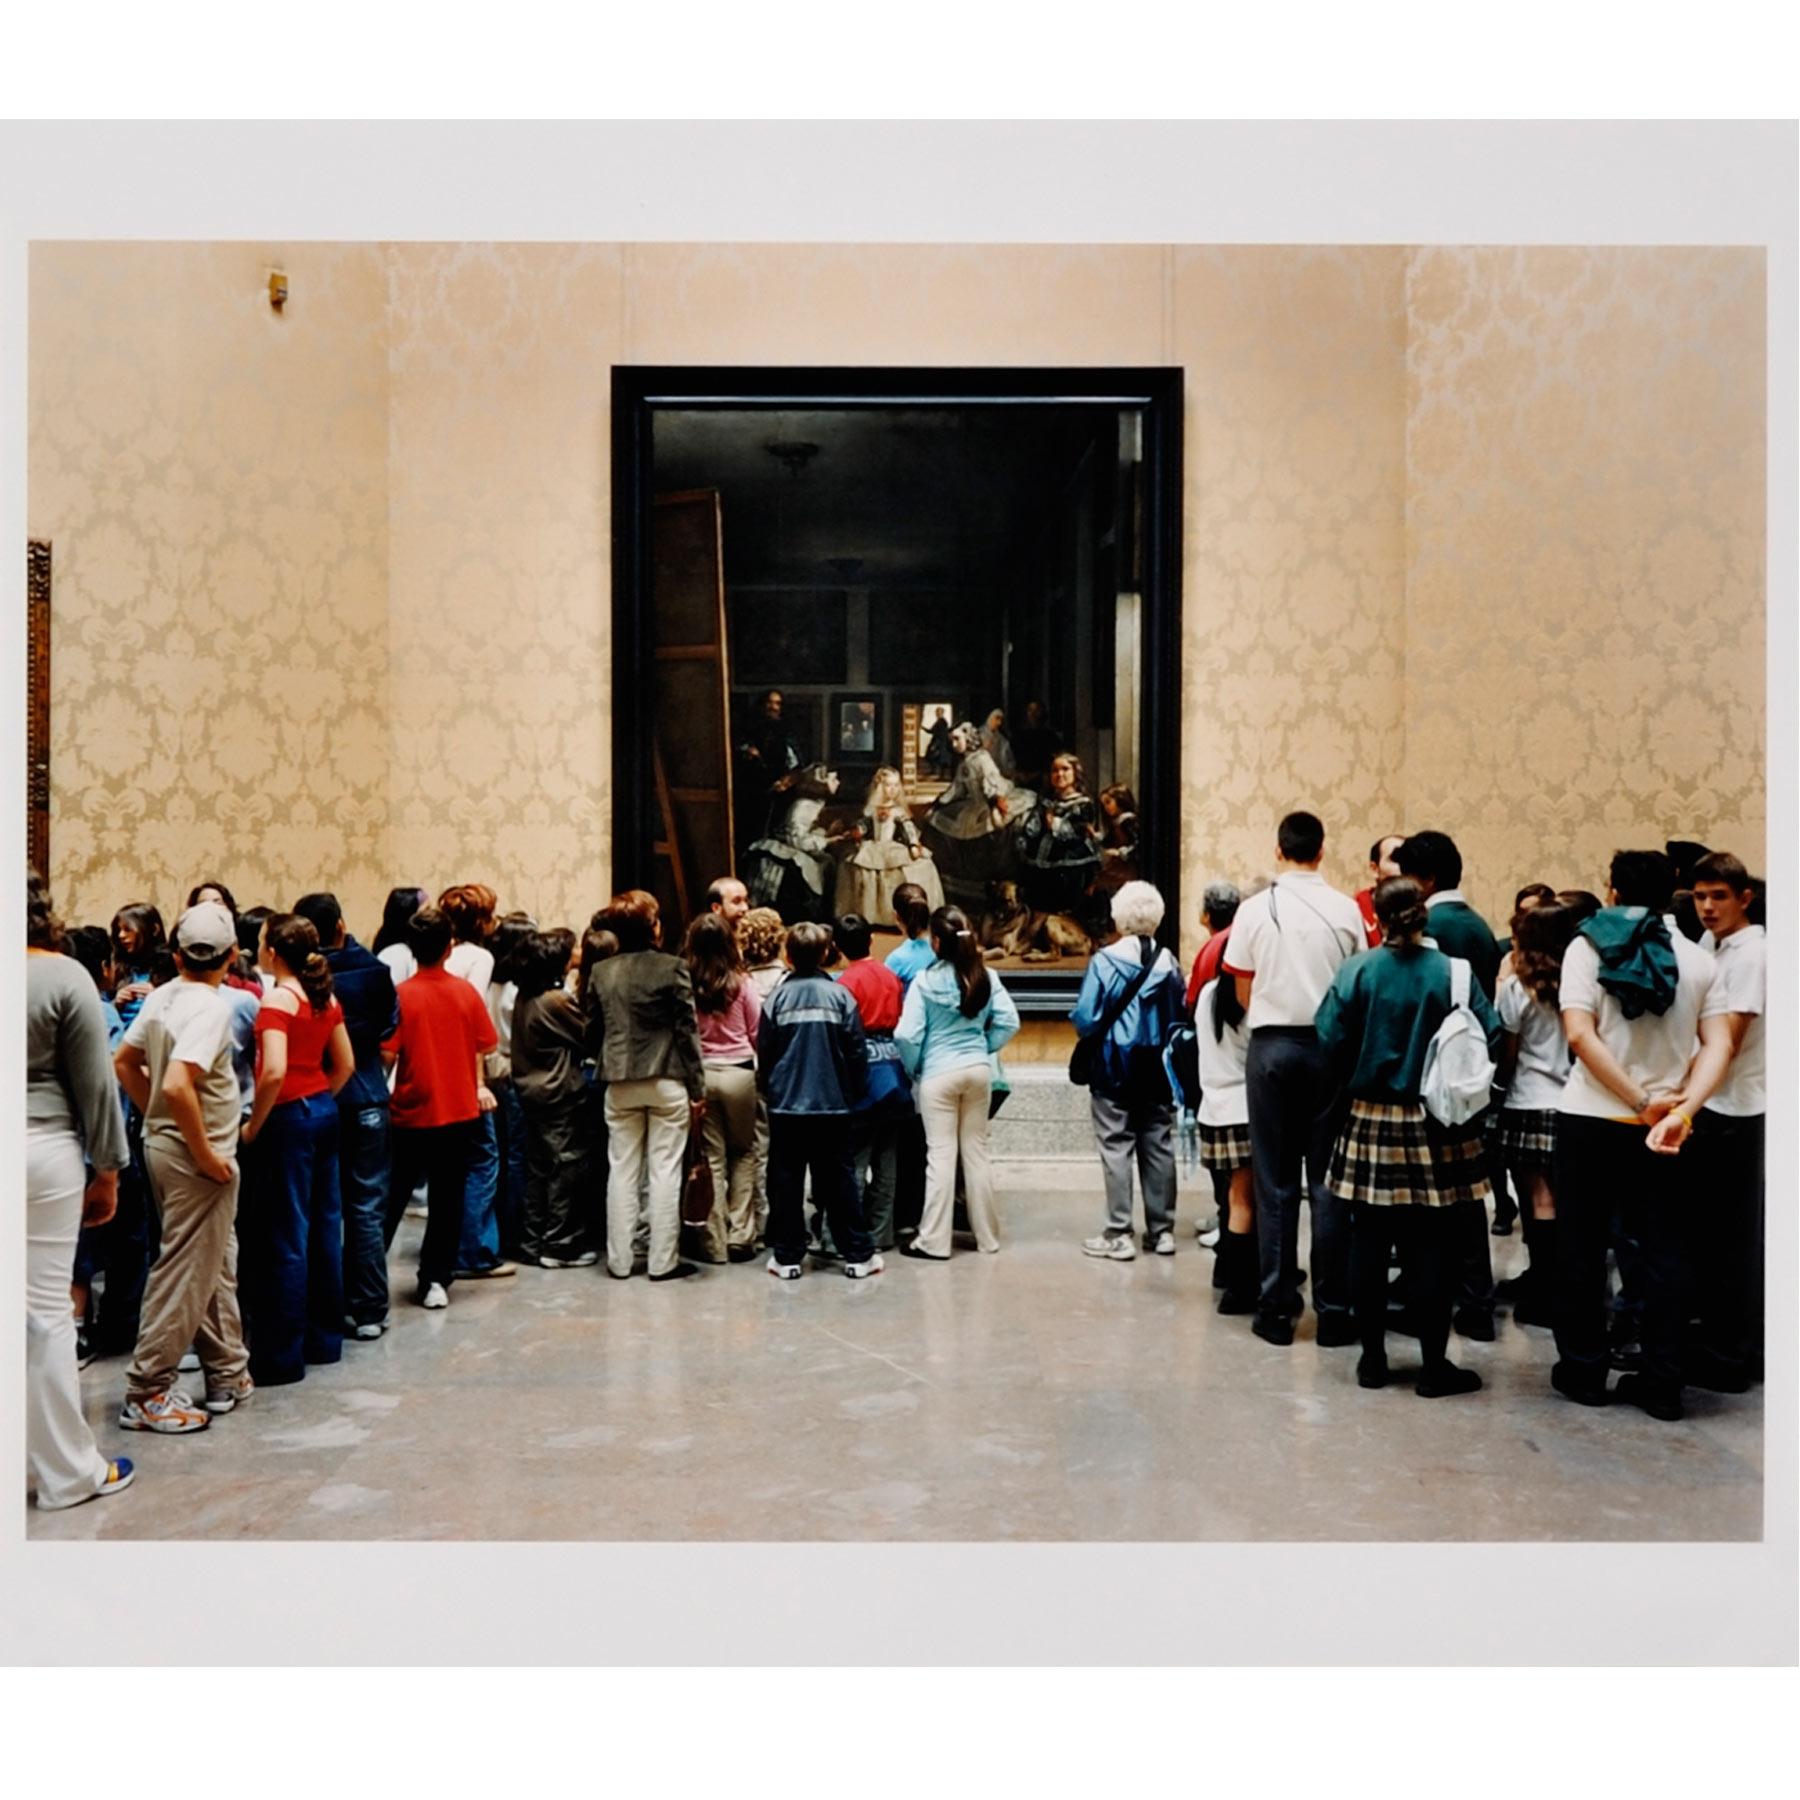 Museo del Prado - Contemporary, 21st Century, C-Print, Limited Edition - Photograph by Thomas Struth